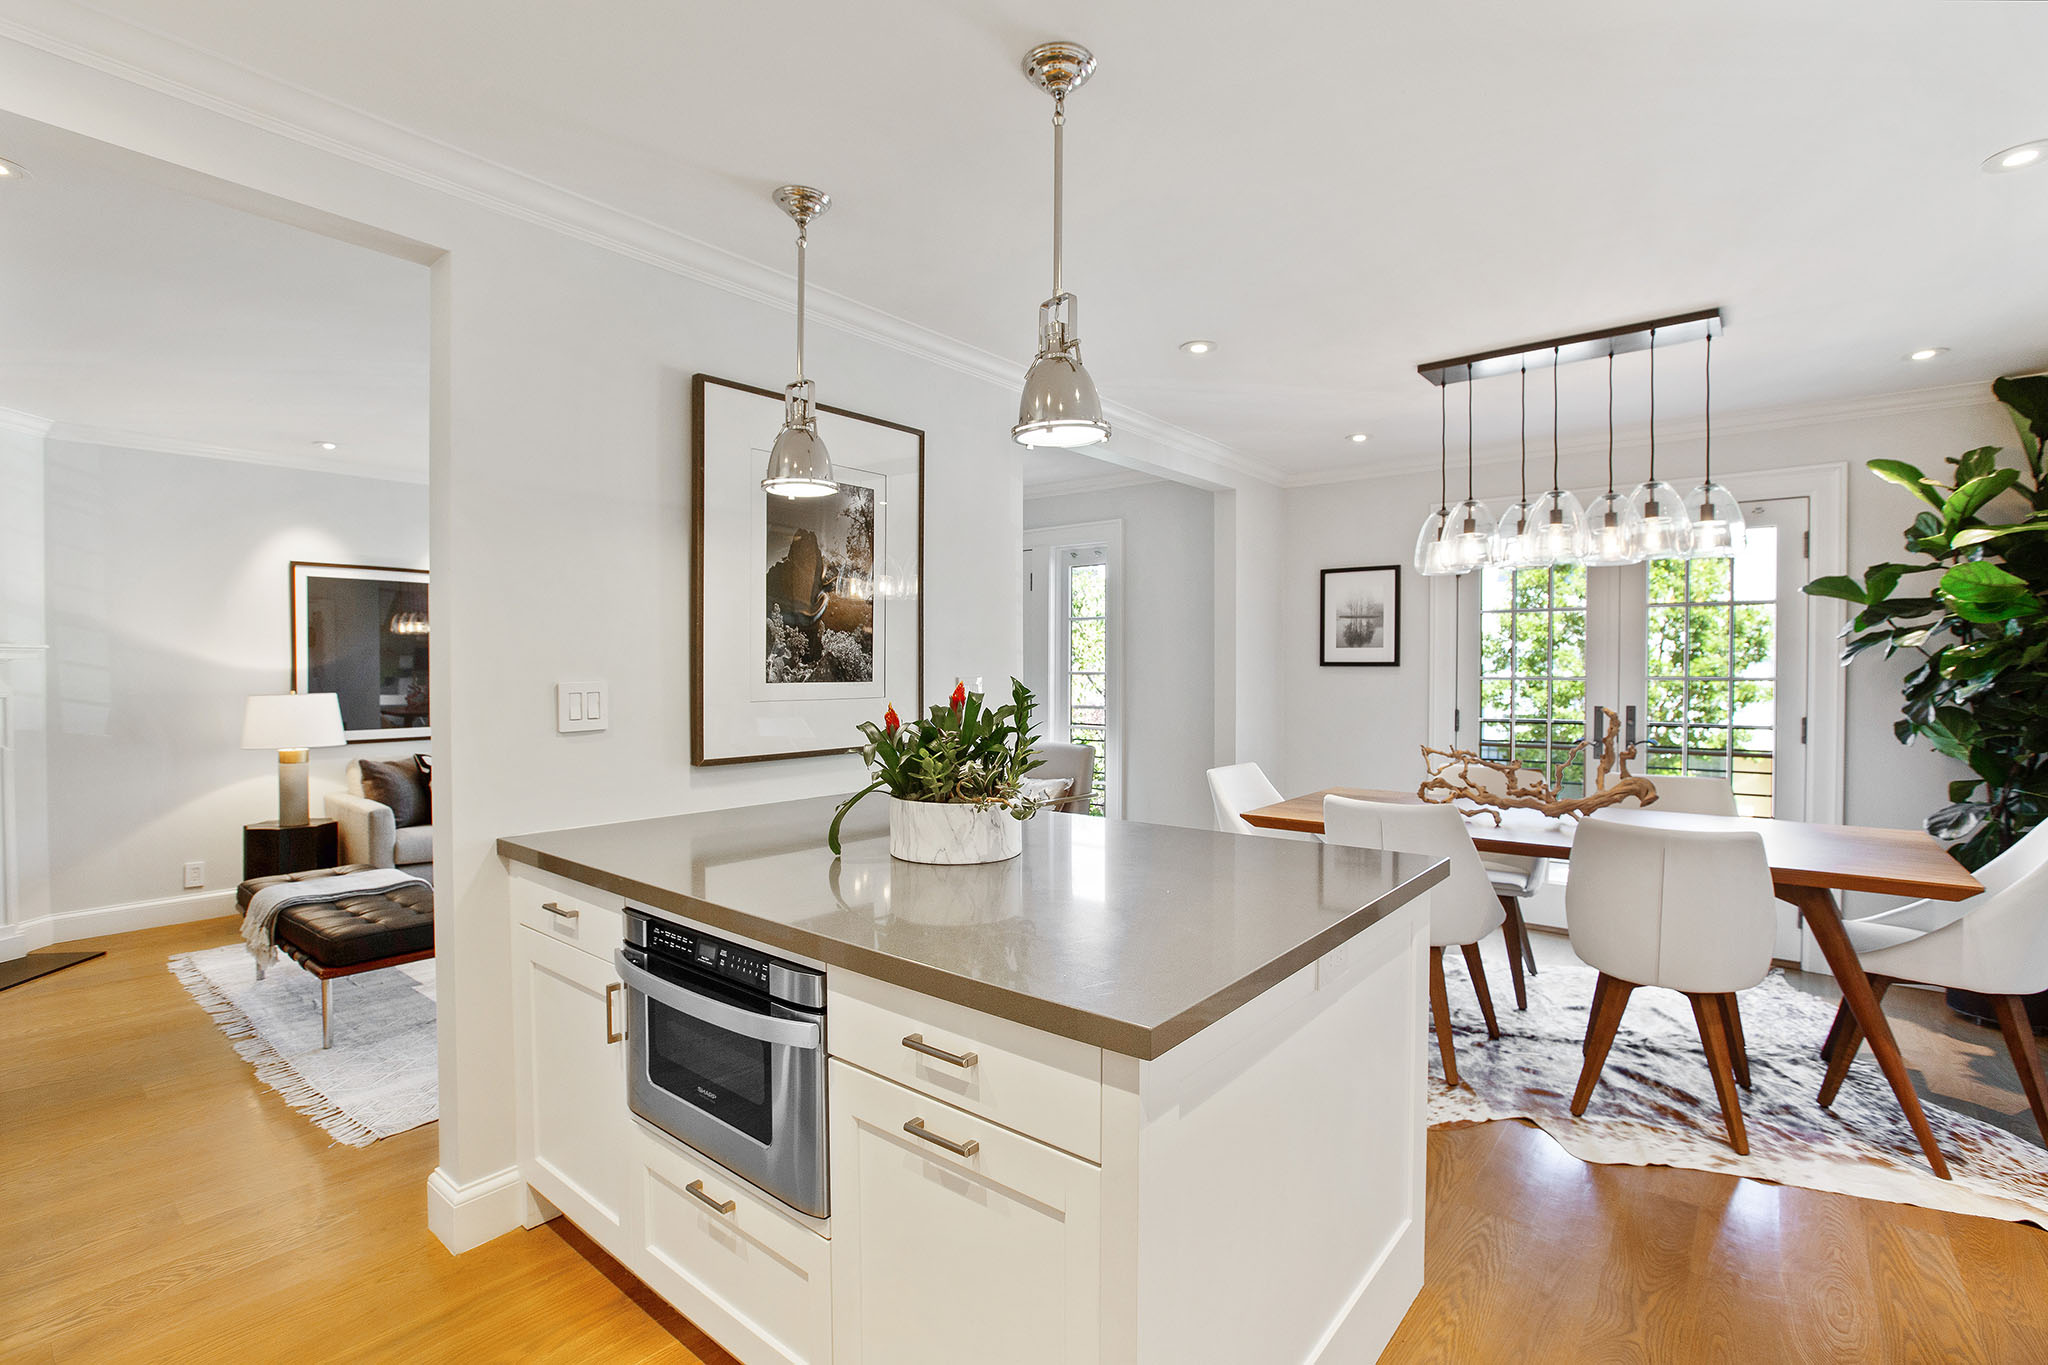 Property Photo: Kitchen, featuring an island and a dining area beyond